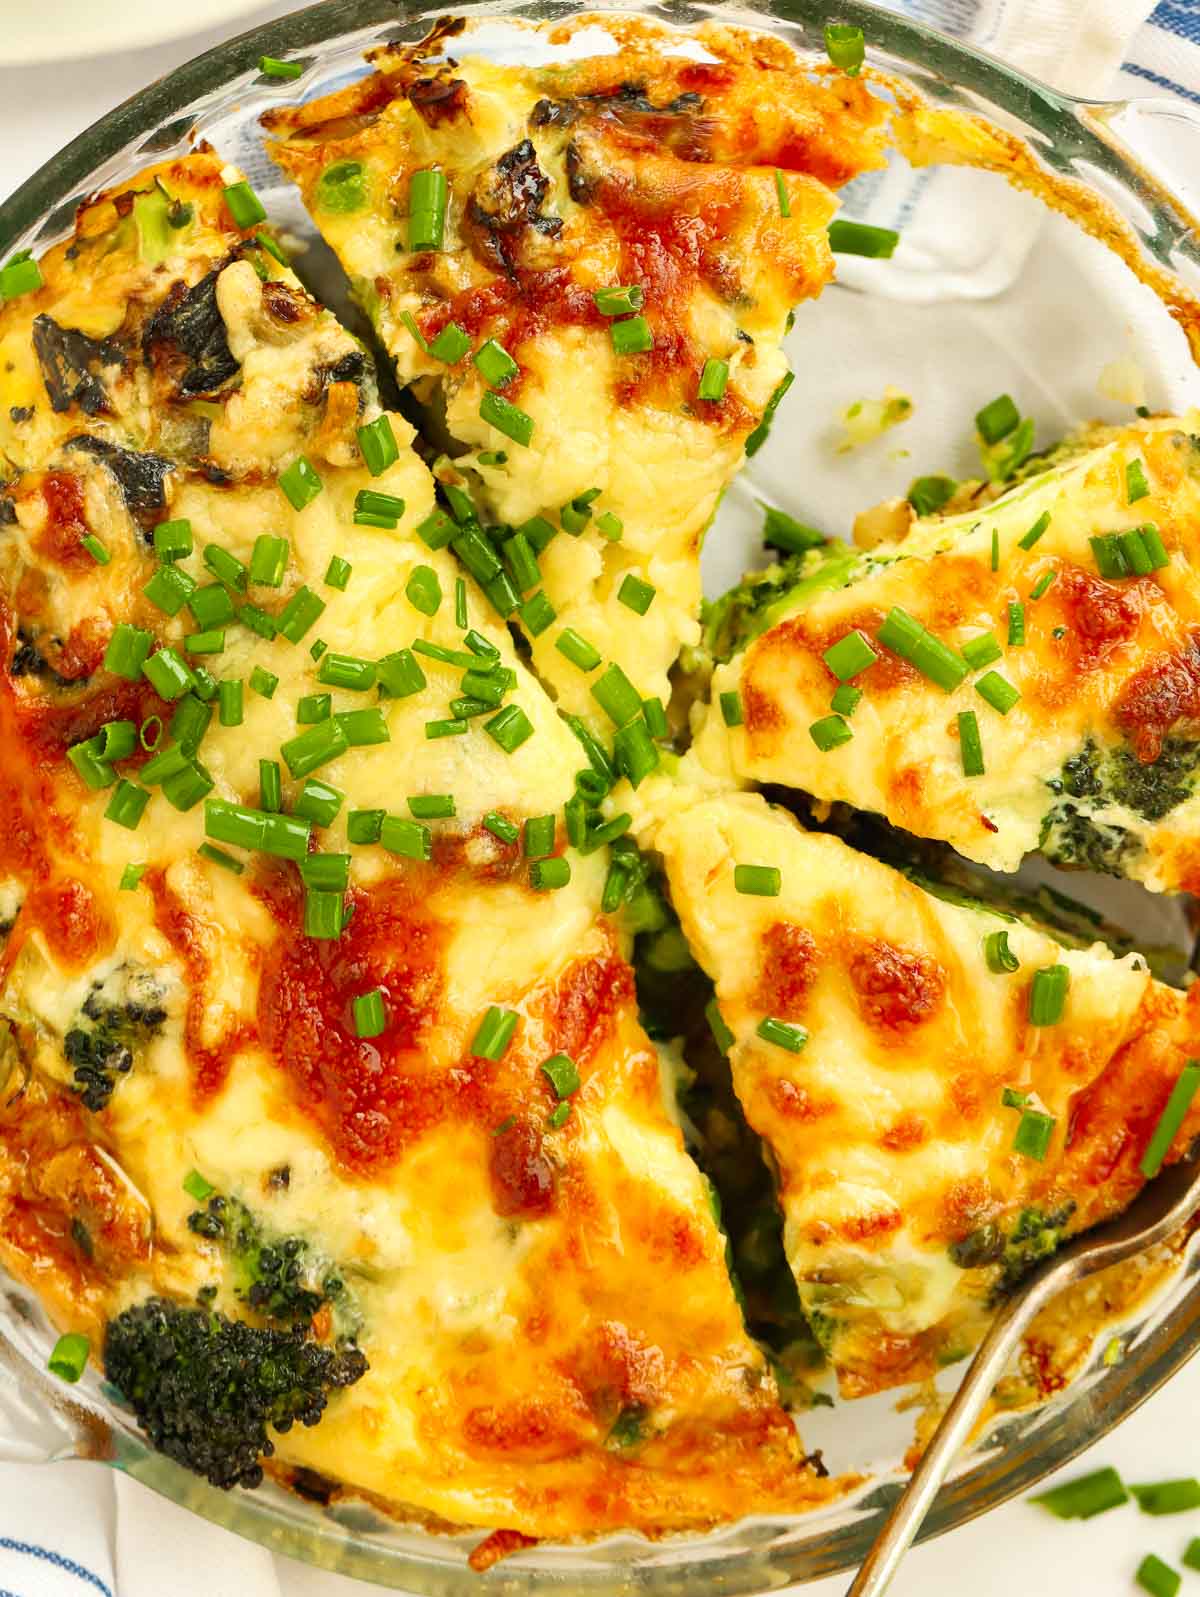 Slices of crustless quiche with vegetable and cheese filling.